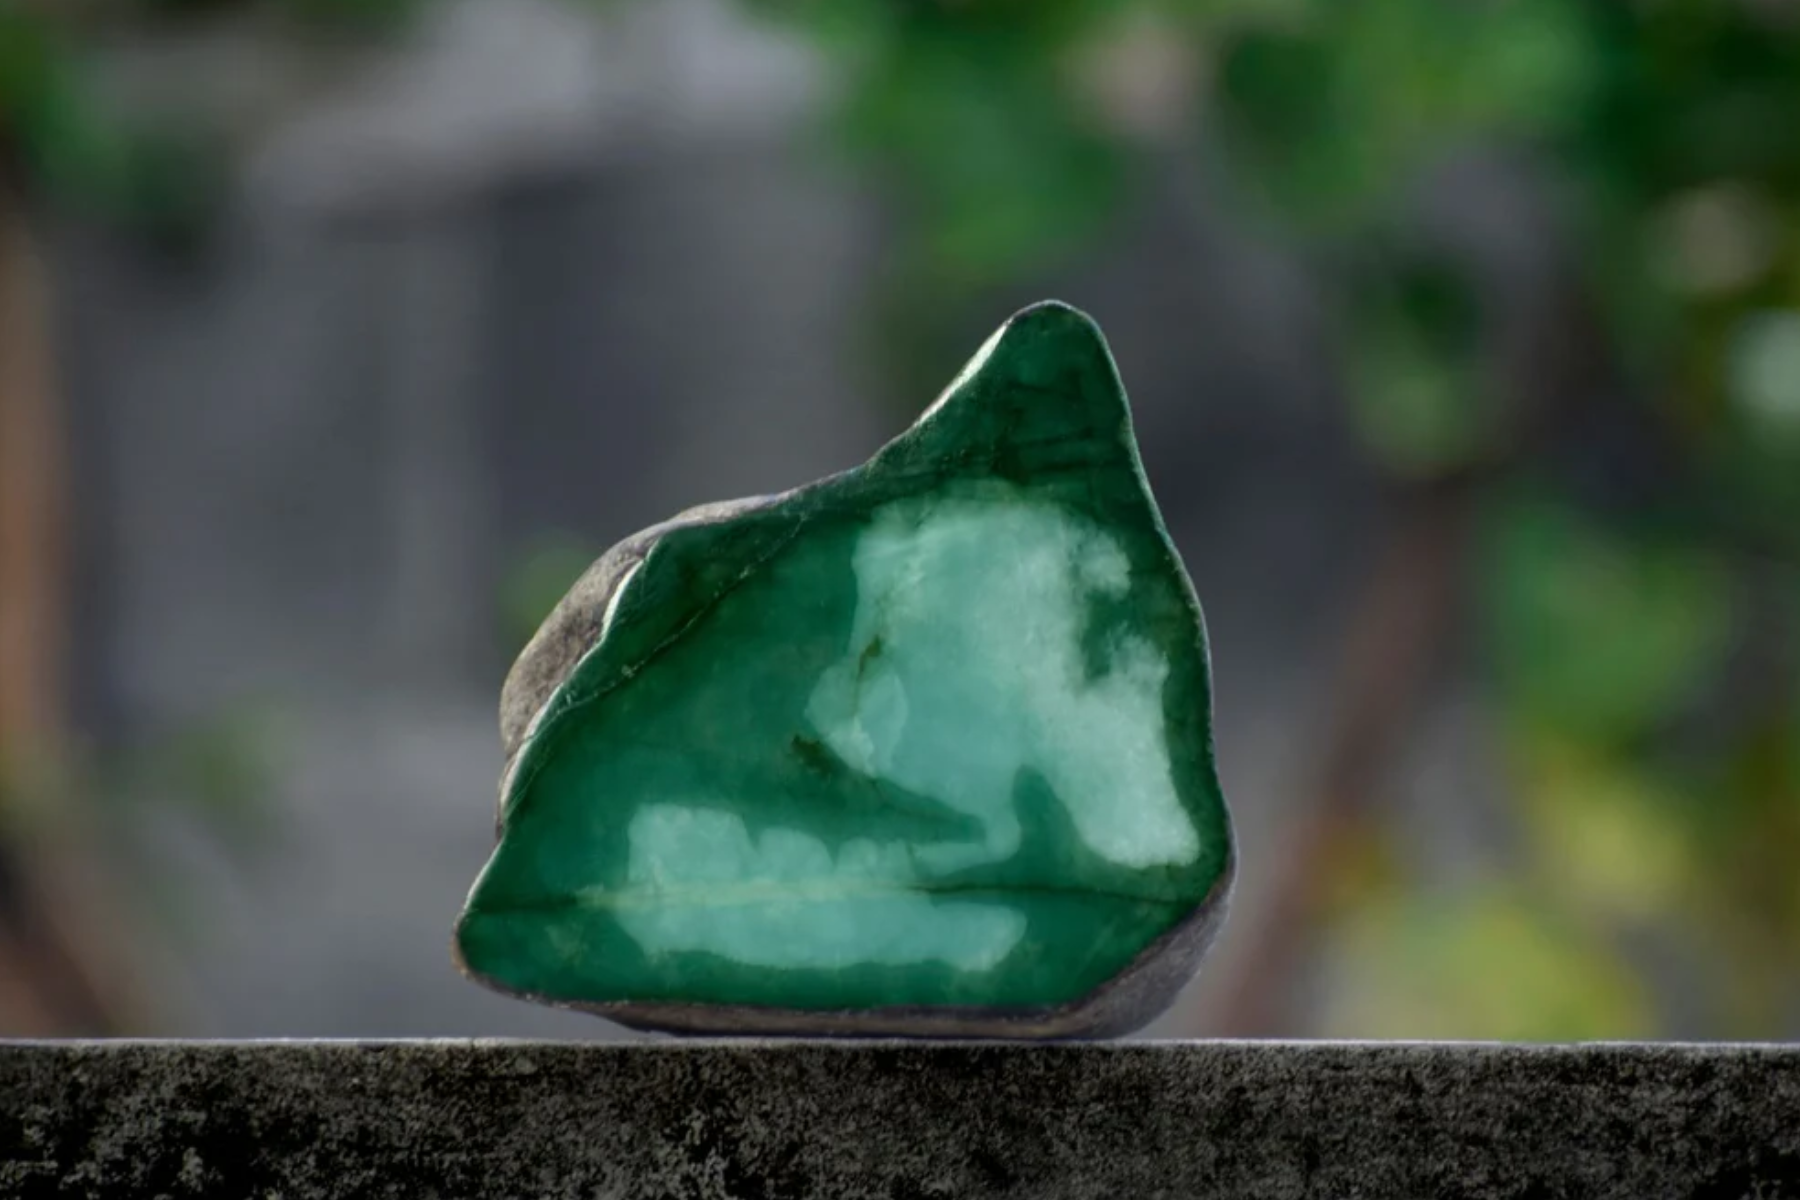 On a blurry scene, a Jade stands on a long block of stone